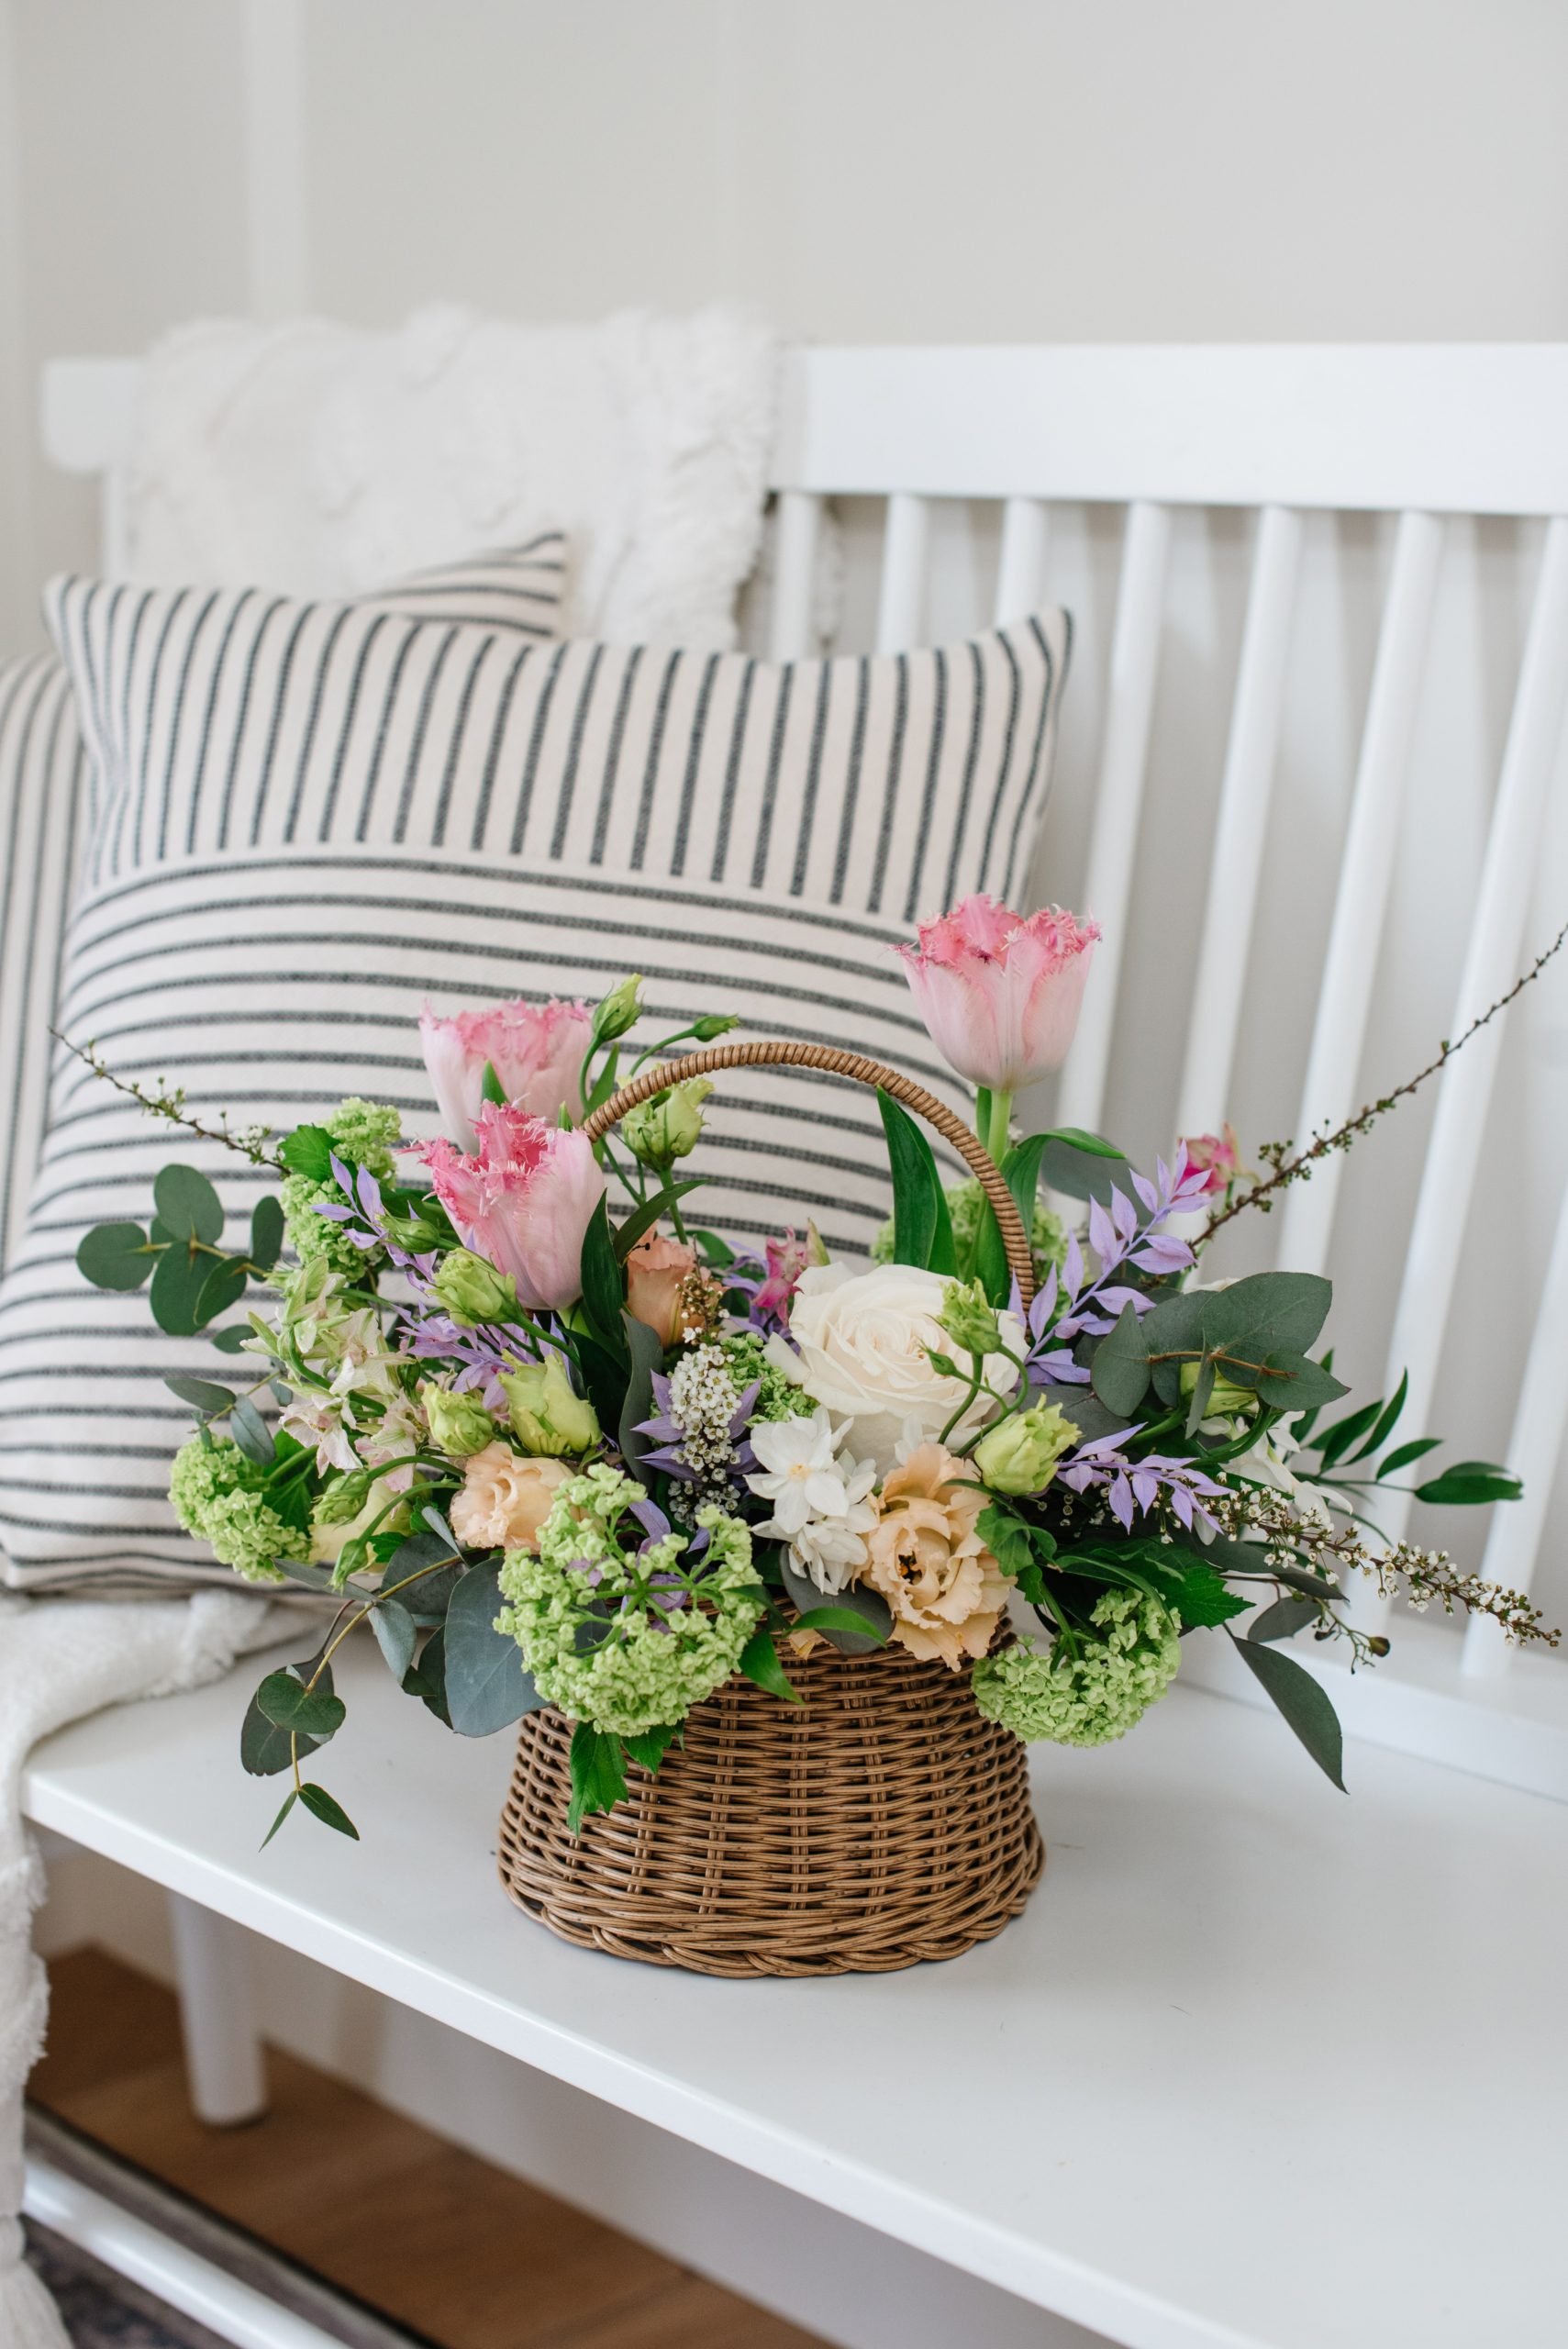 A medley of spring coloured flowers with a garden vibe designed into a beautiful woven basket